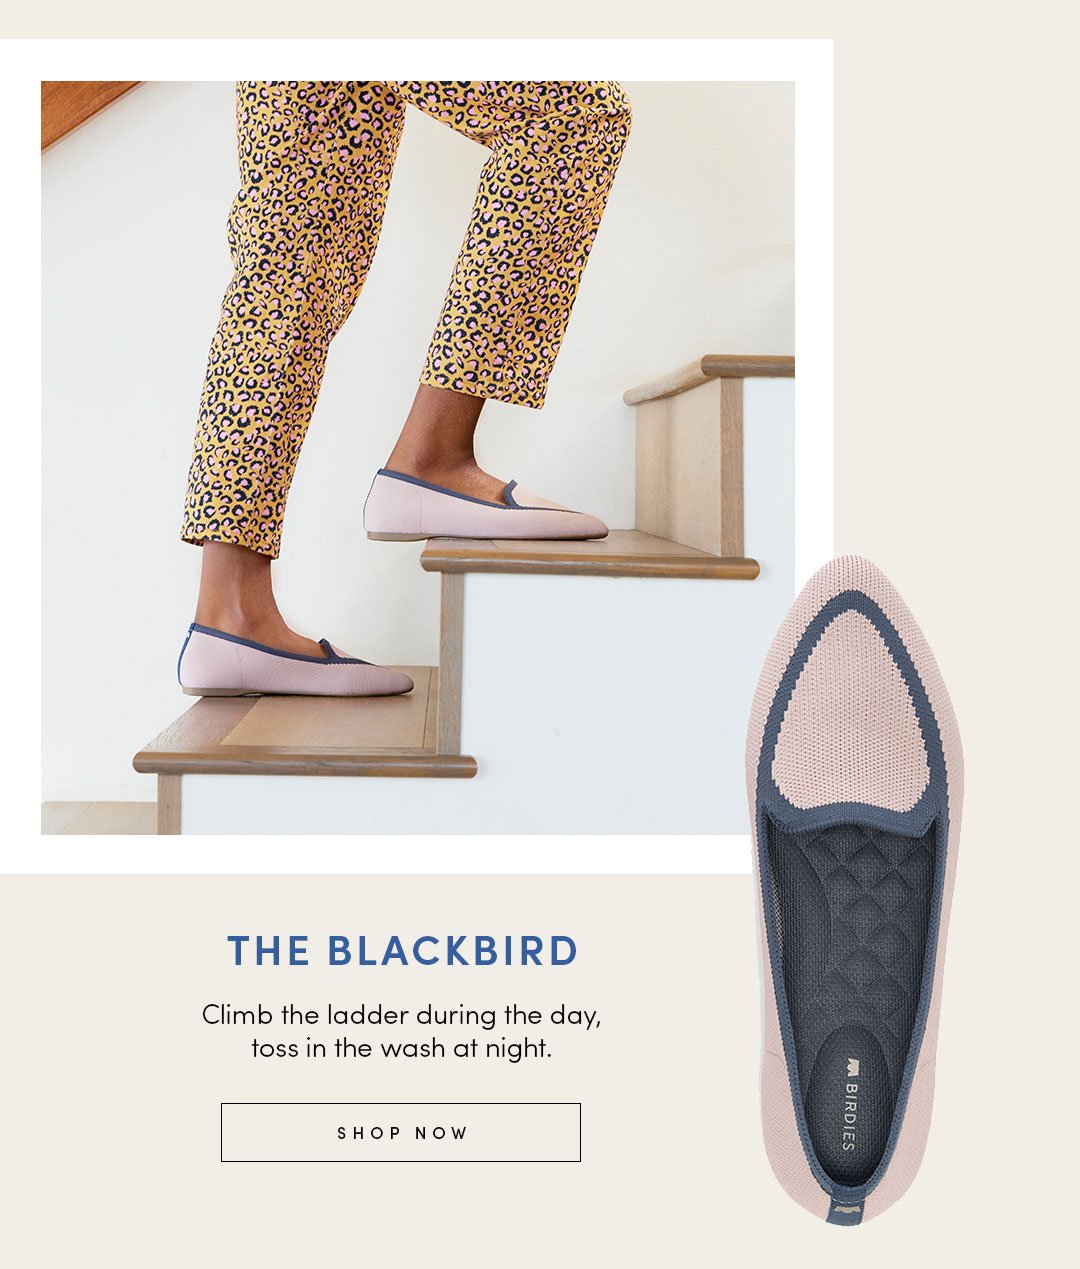 THE BLACKBIRD Climb the ladder during the day, toss in the wash at night. SHOP NOW